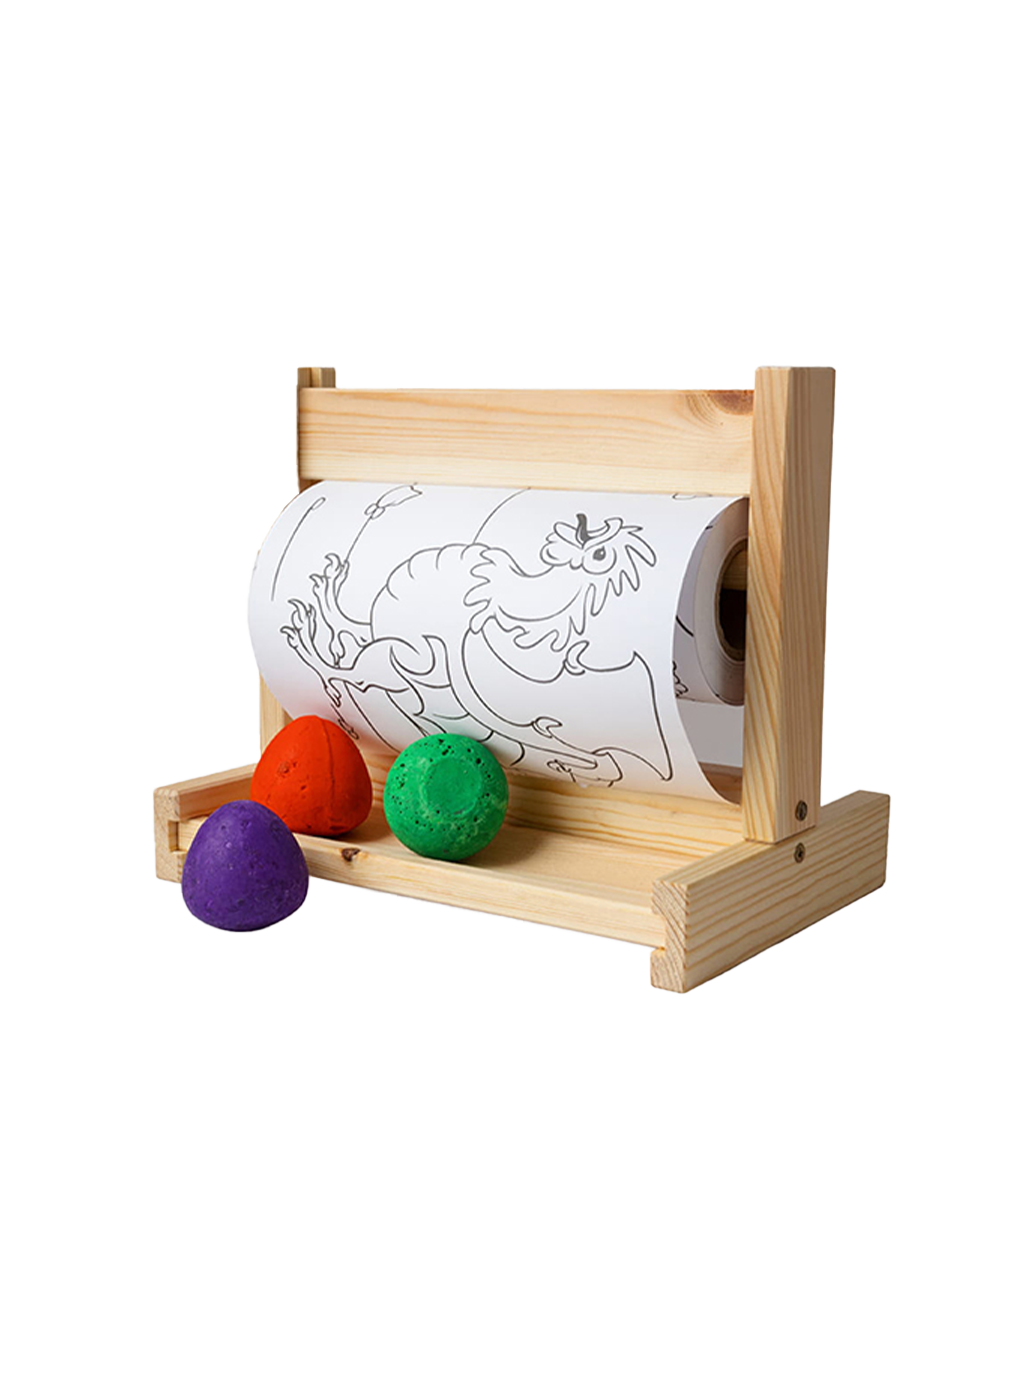 Wooden stand for a coloring book on a roll